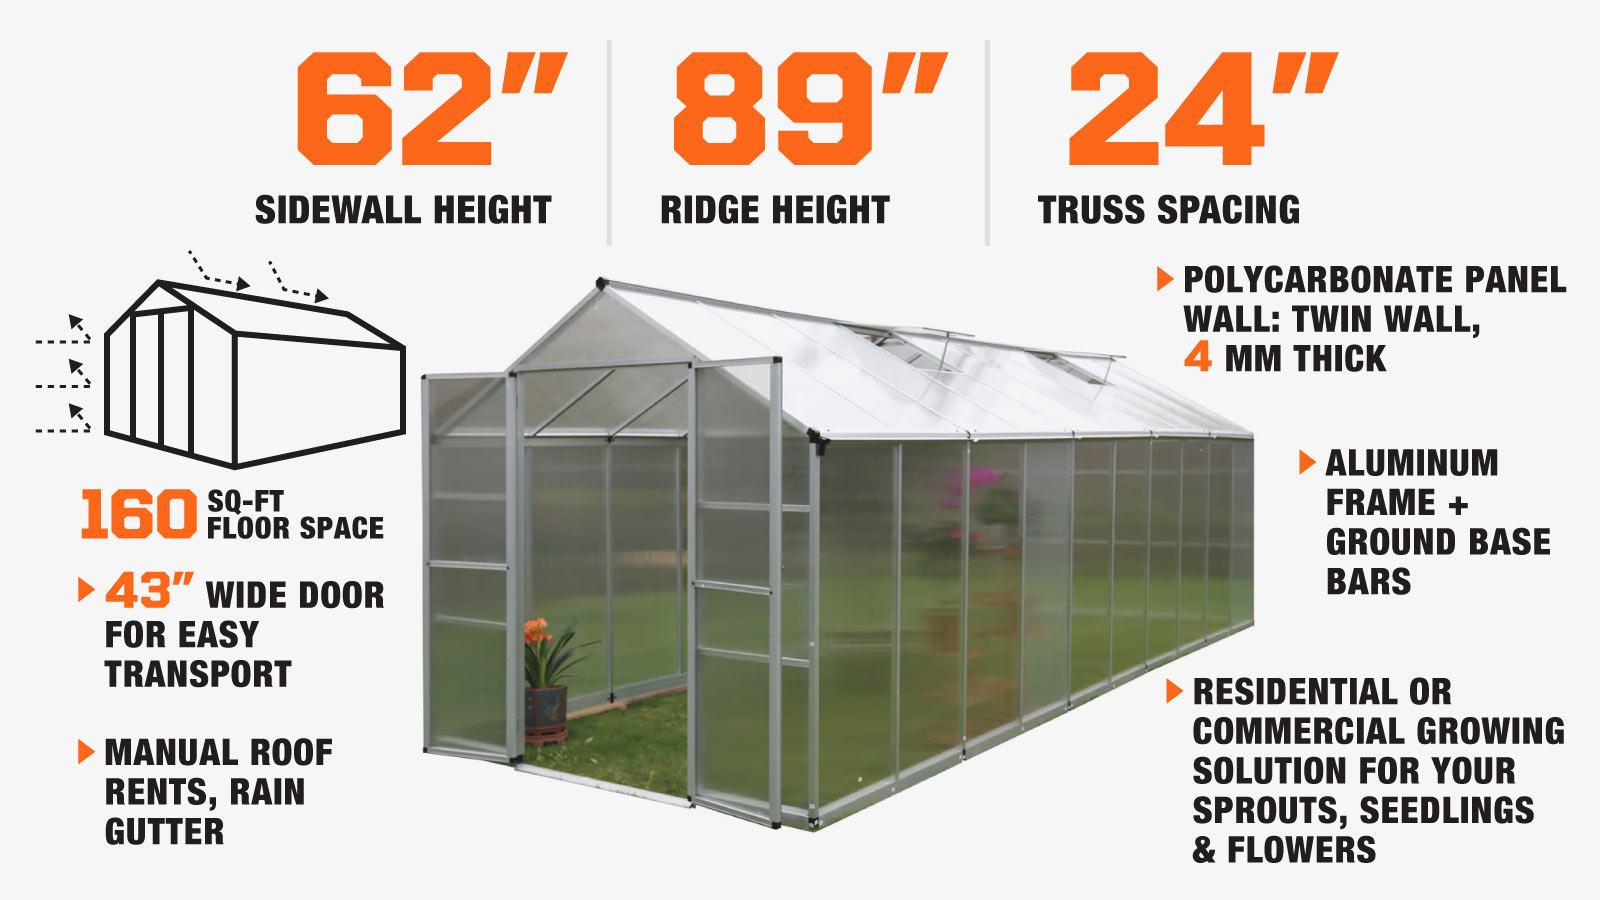 TMG Industrial 8' x 20' Aluminum Frame Greenhouse w/4 mm Twin Wall Polycarbonate Panels, UV Protected Panels, TMG-GH820-description-image